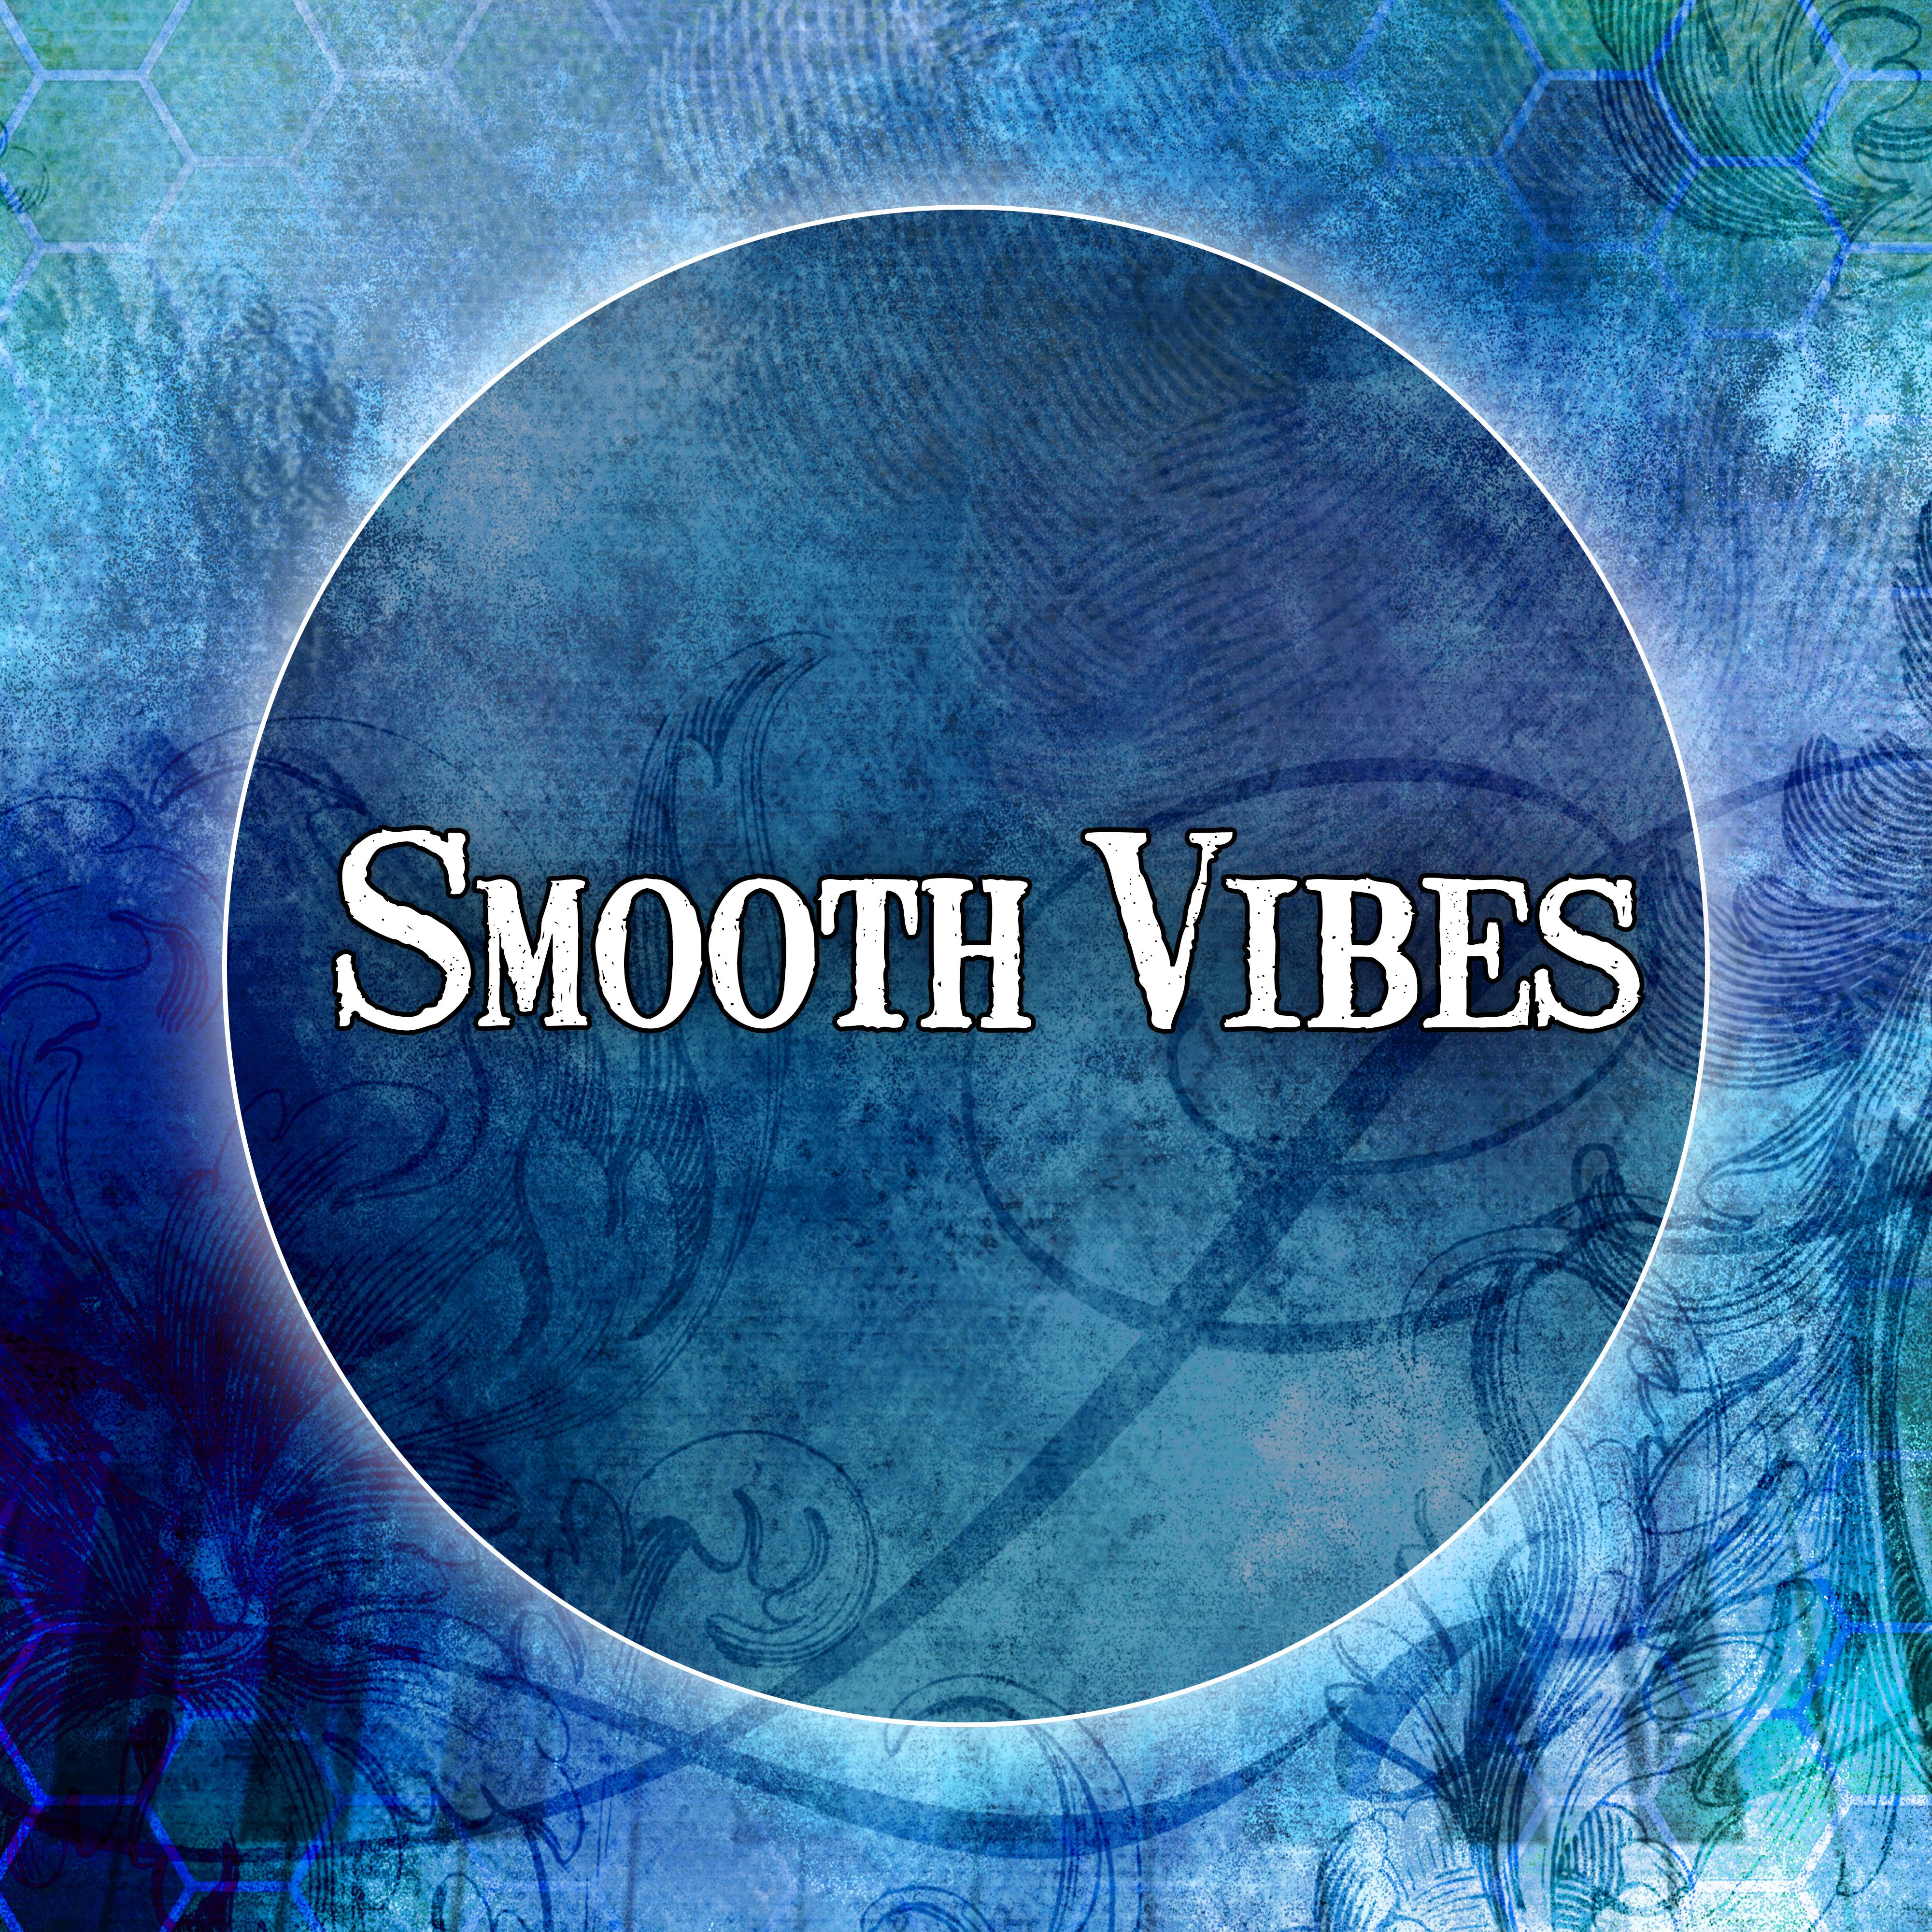 Smooth Vibes  Peaceful Sounds of Jazz Music, Best Background Jazz Music for Jazz Cocktail